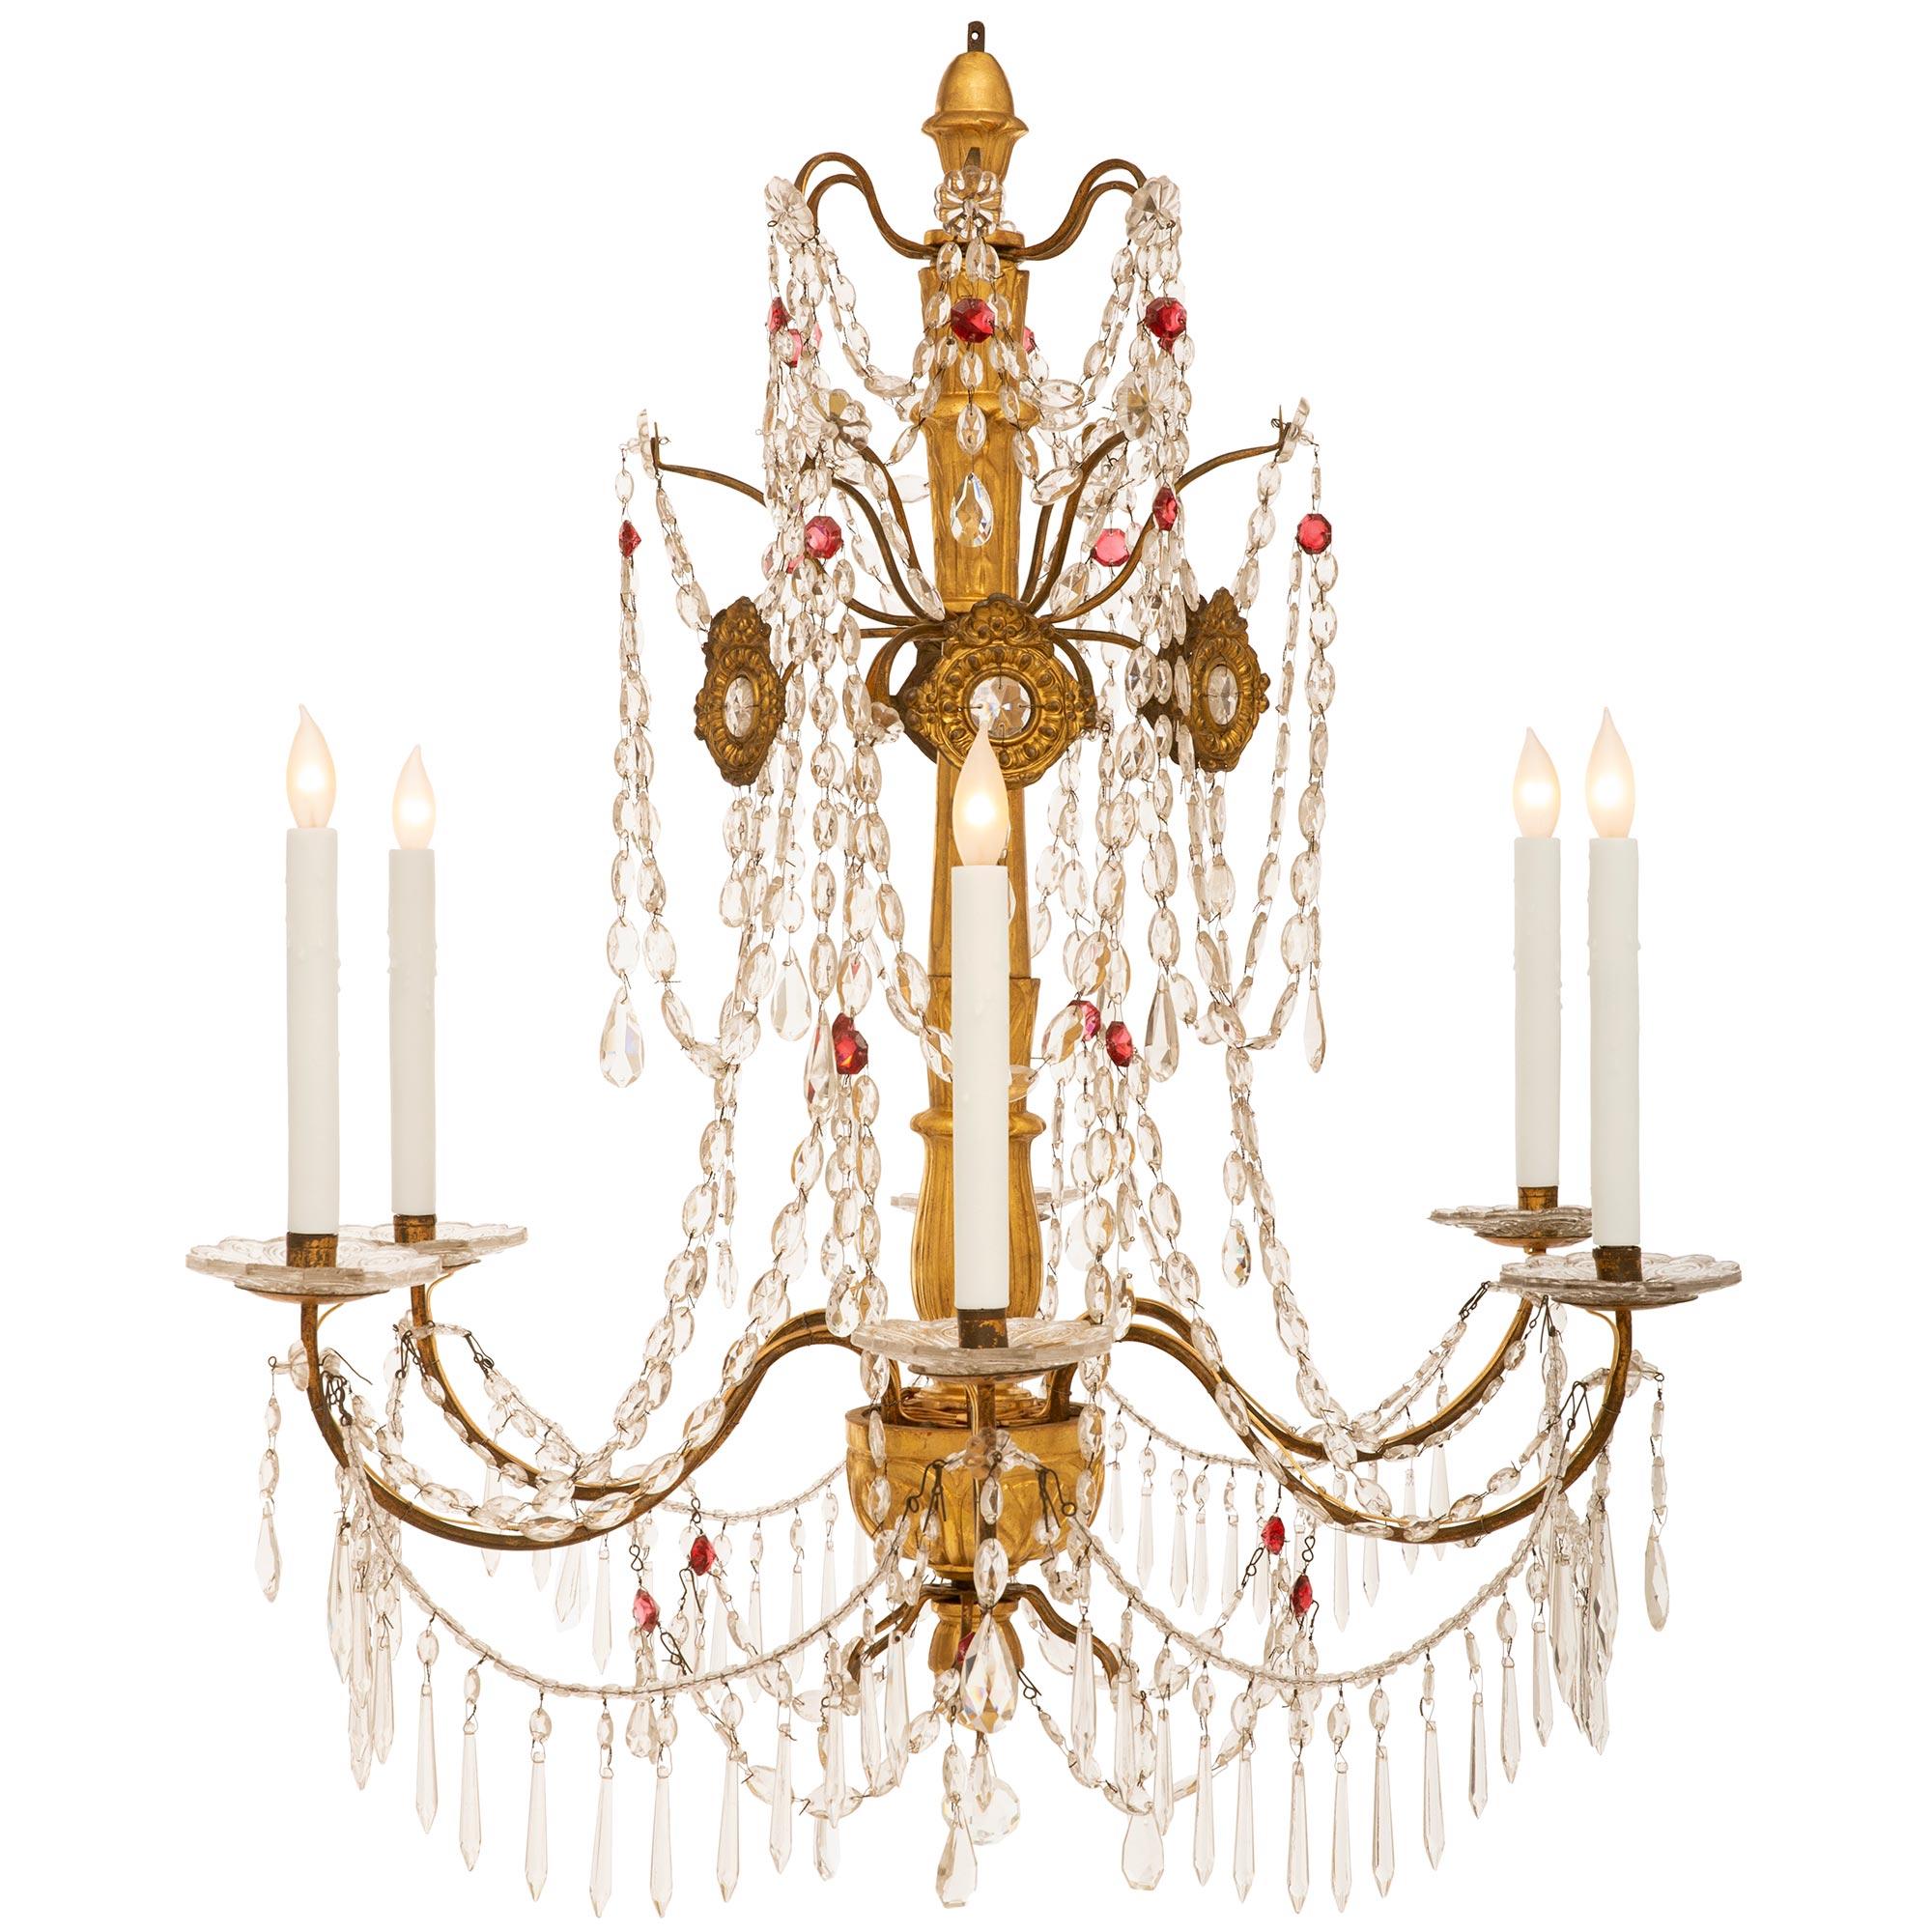 A beautiful and very elegant pair of Italian 18th century Genovese st. Giltwood, glass, Iron and Crystal chandeliers. Each six arm chandelier is centered by a lovely bottom Giltwood acorn finial surrounded by charming crystal pendants. The elegantly